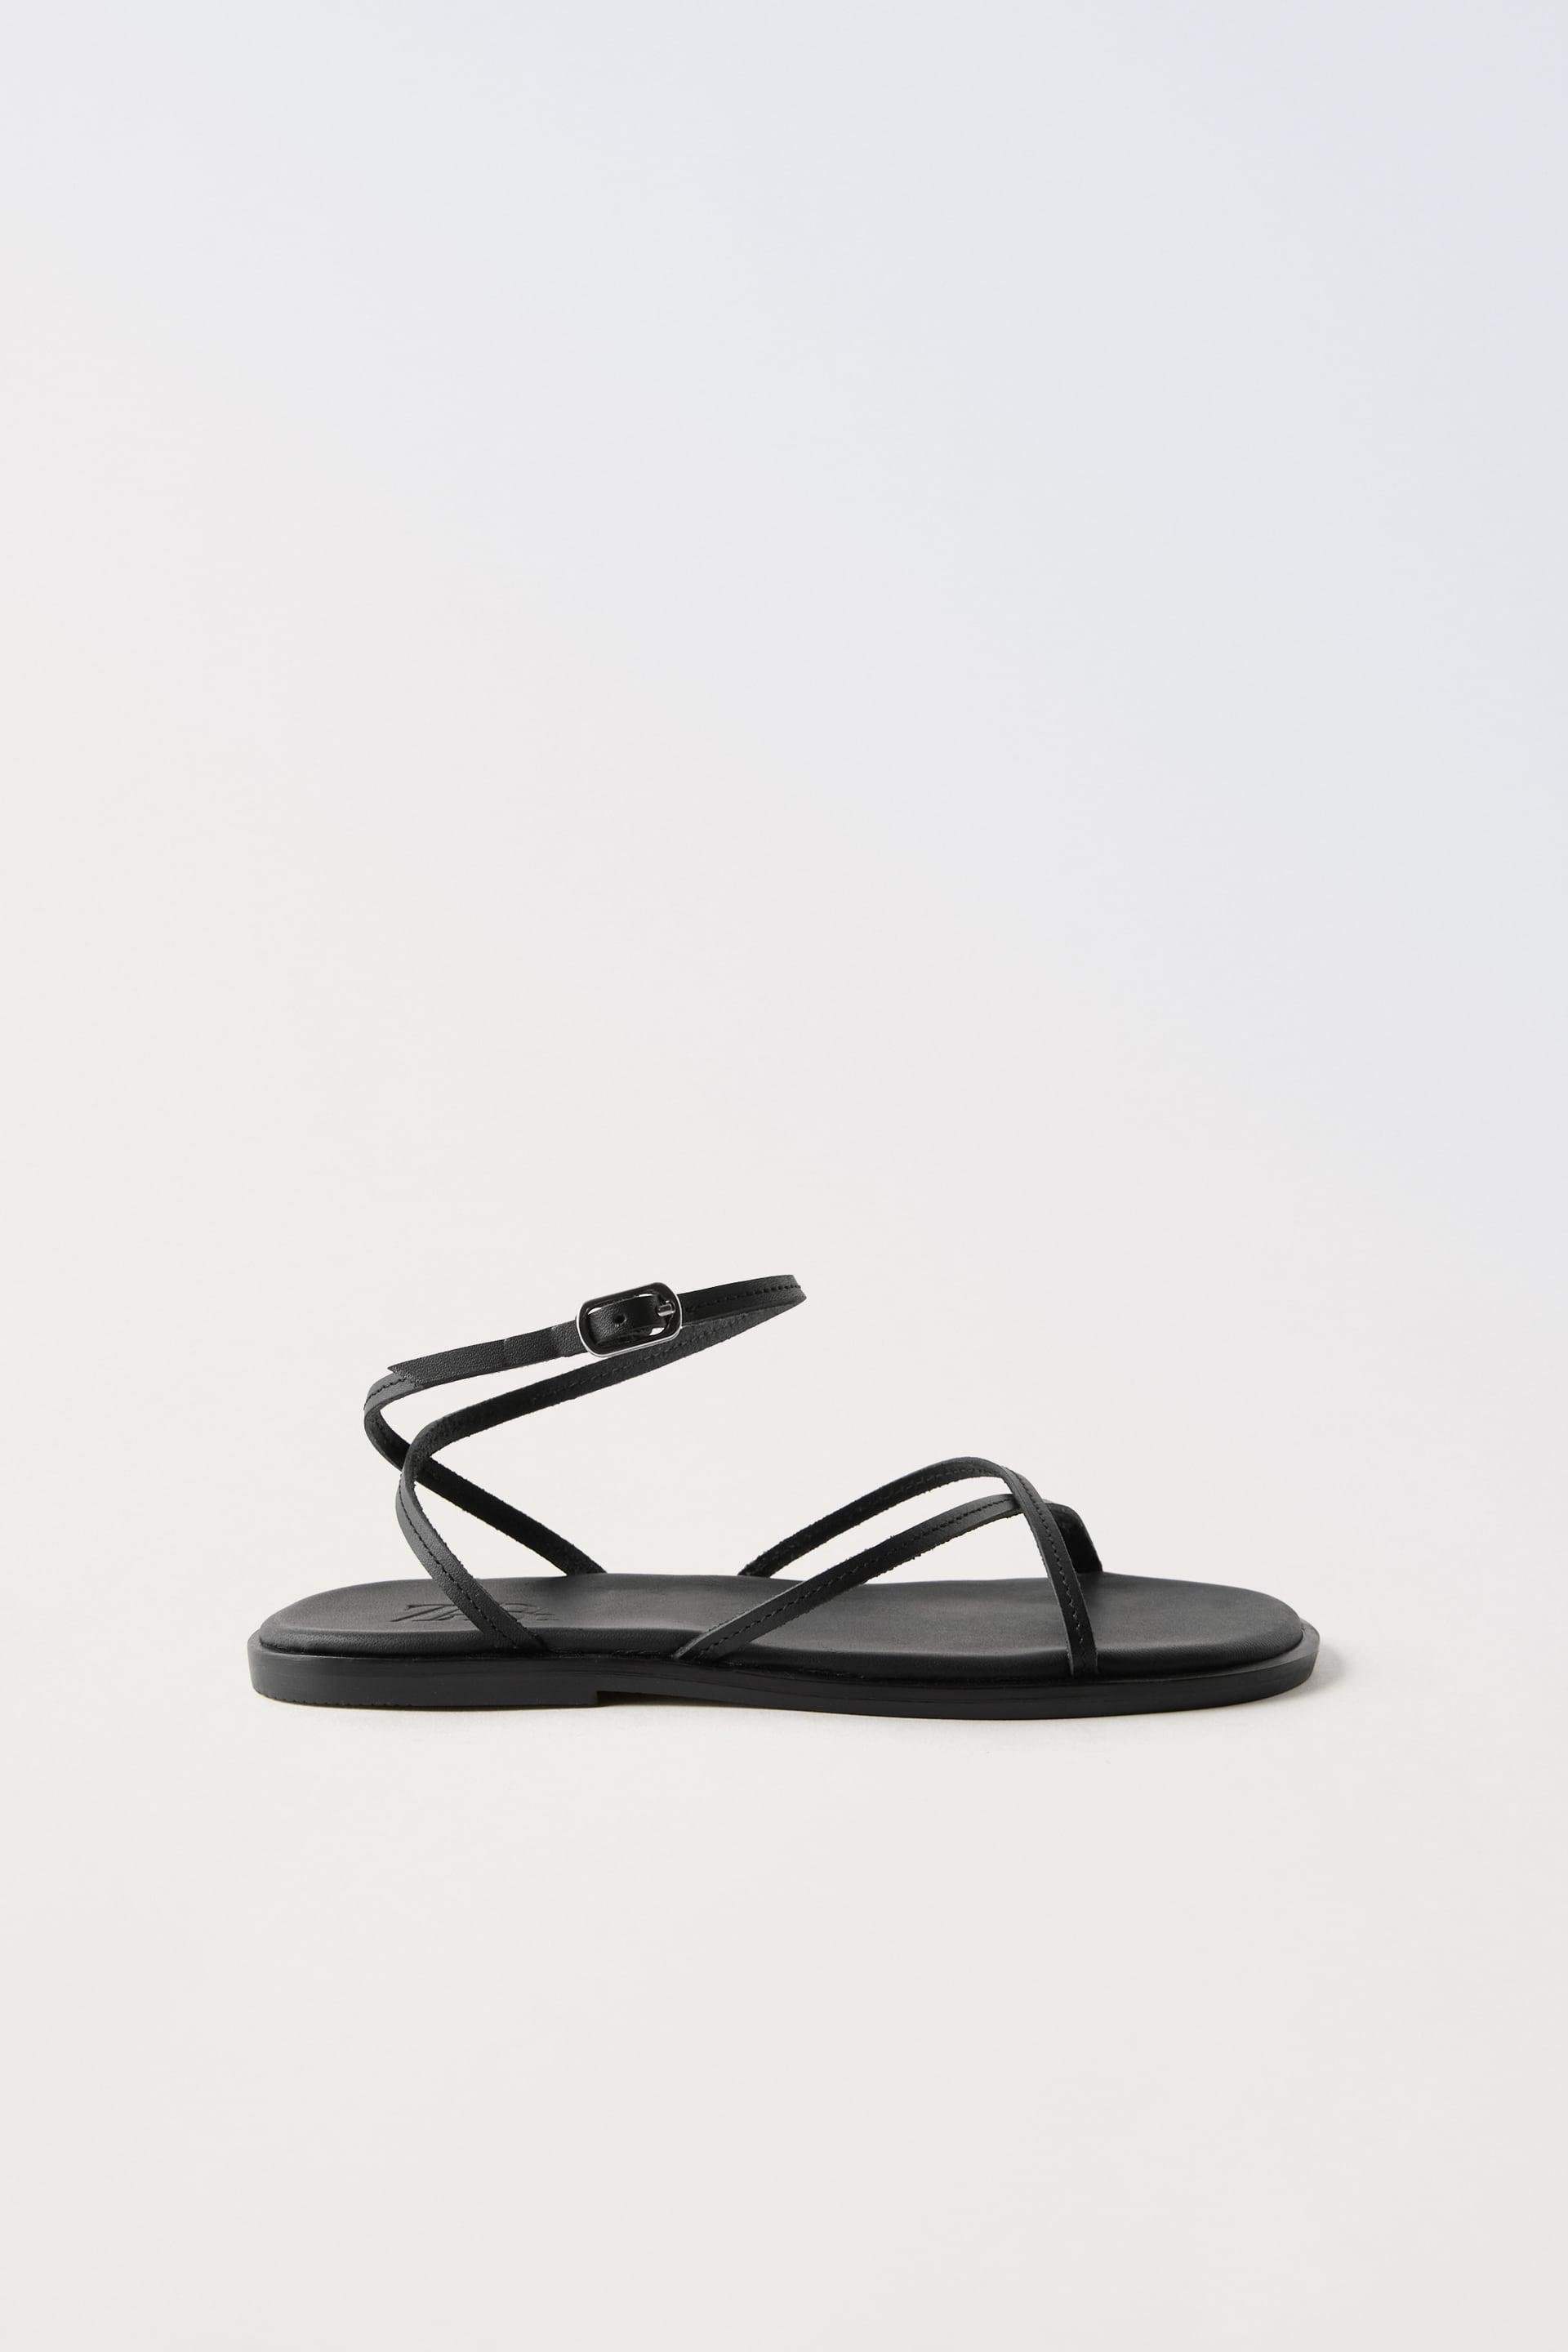 LEATHER STRAPPY SANDALS by ZARA